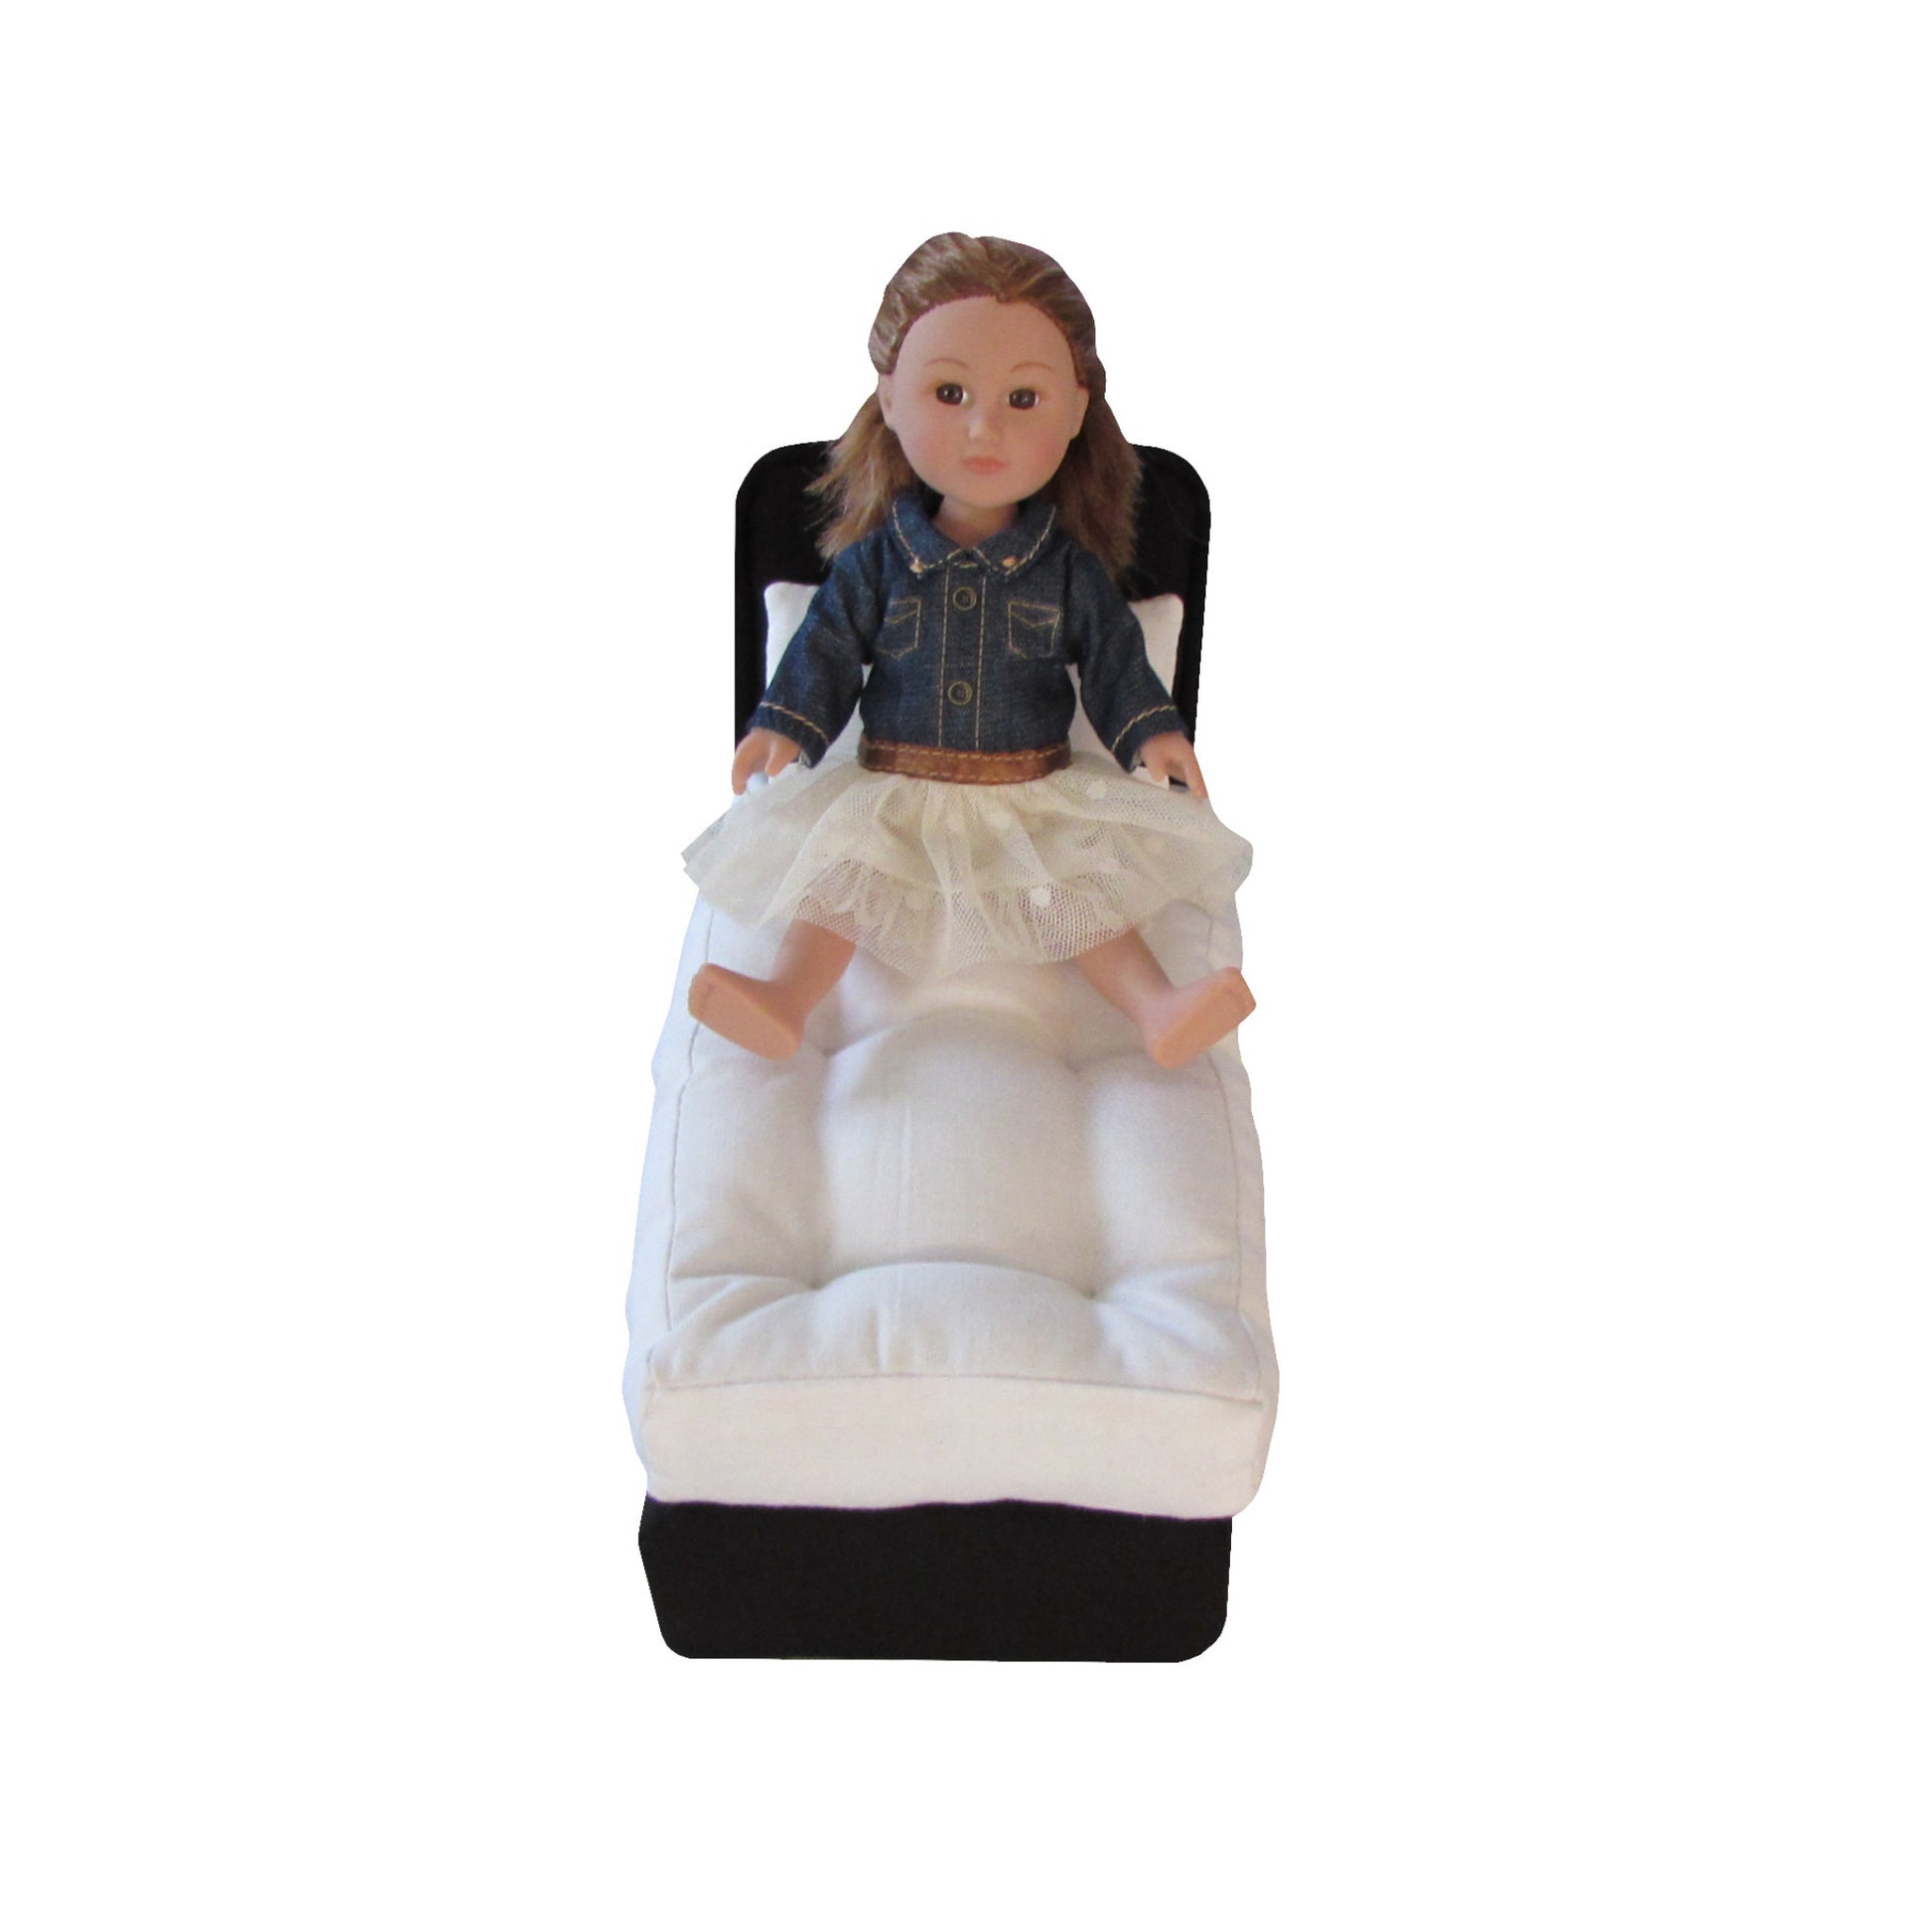 Upholstered Black Doll Bed for 6.5-inch dolls Third view